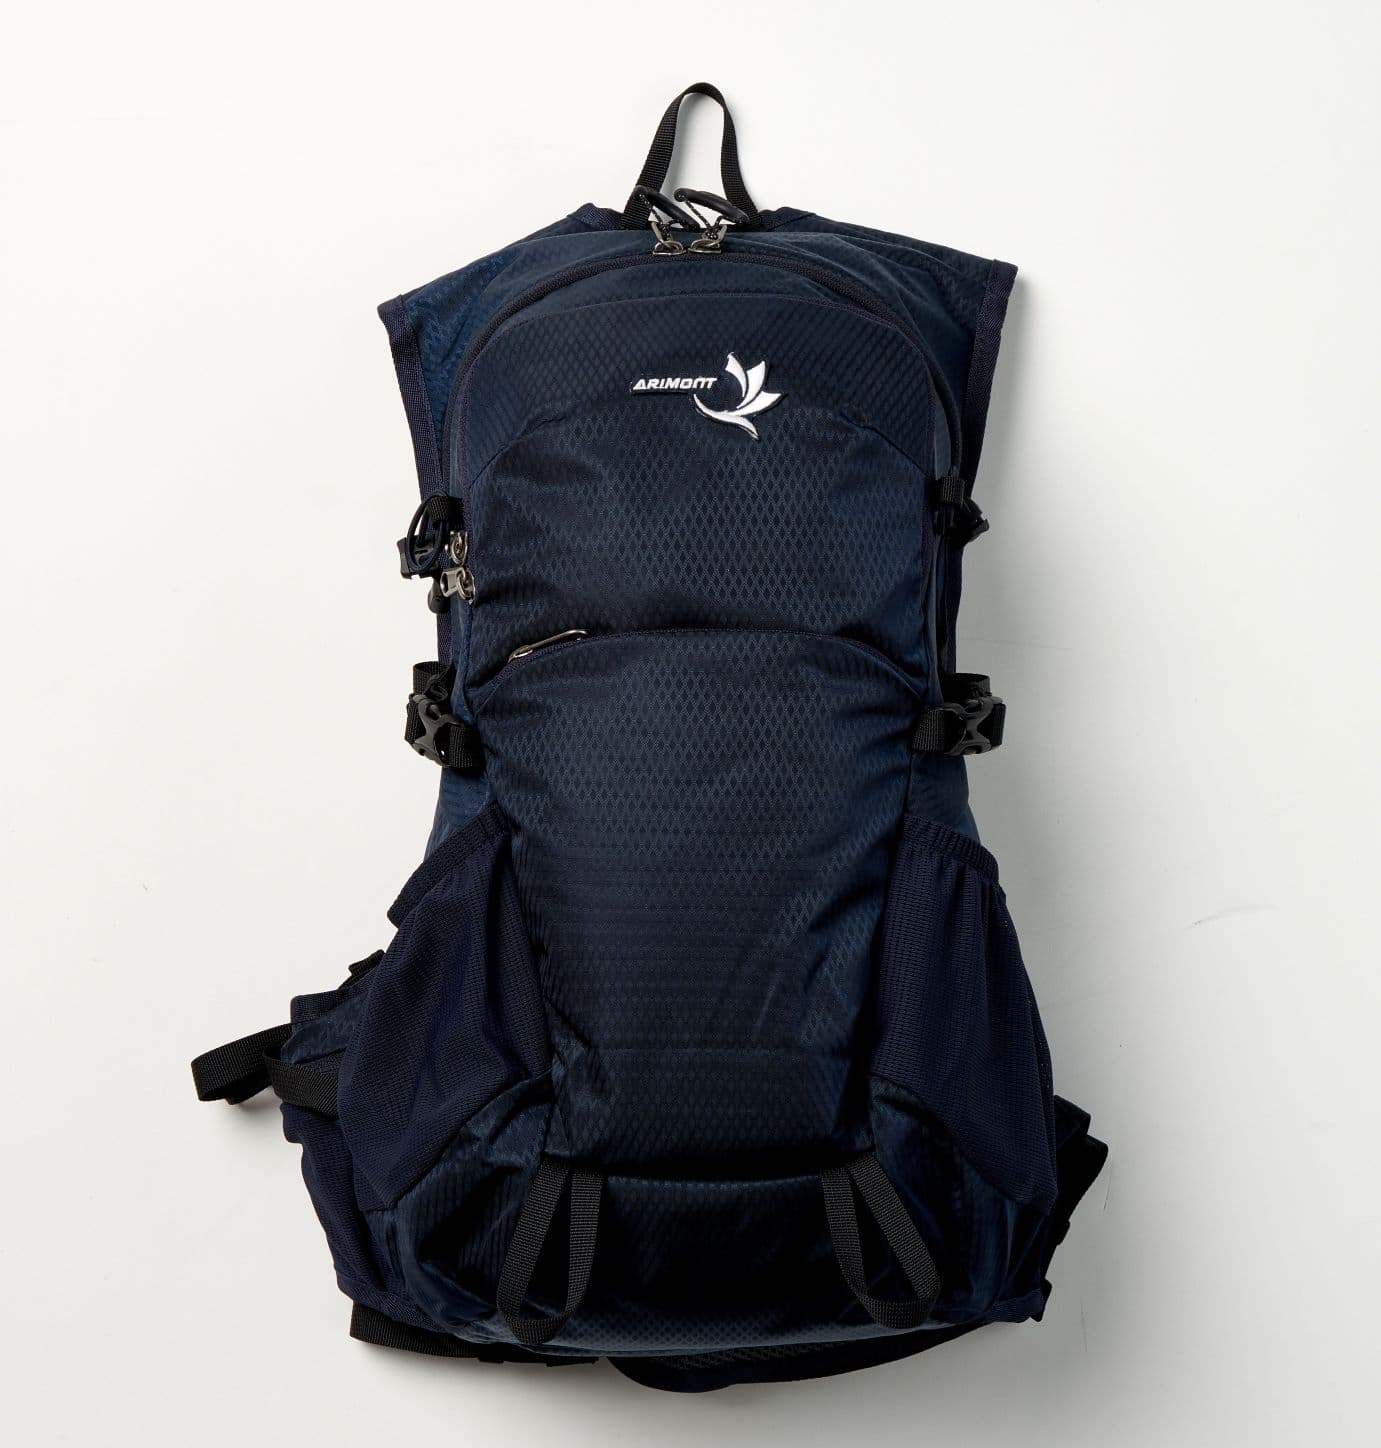 Arimont backpack 20L